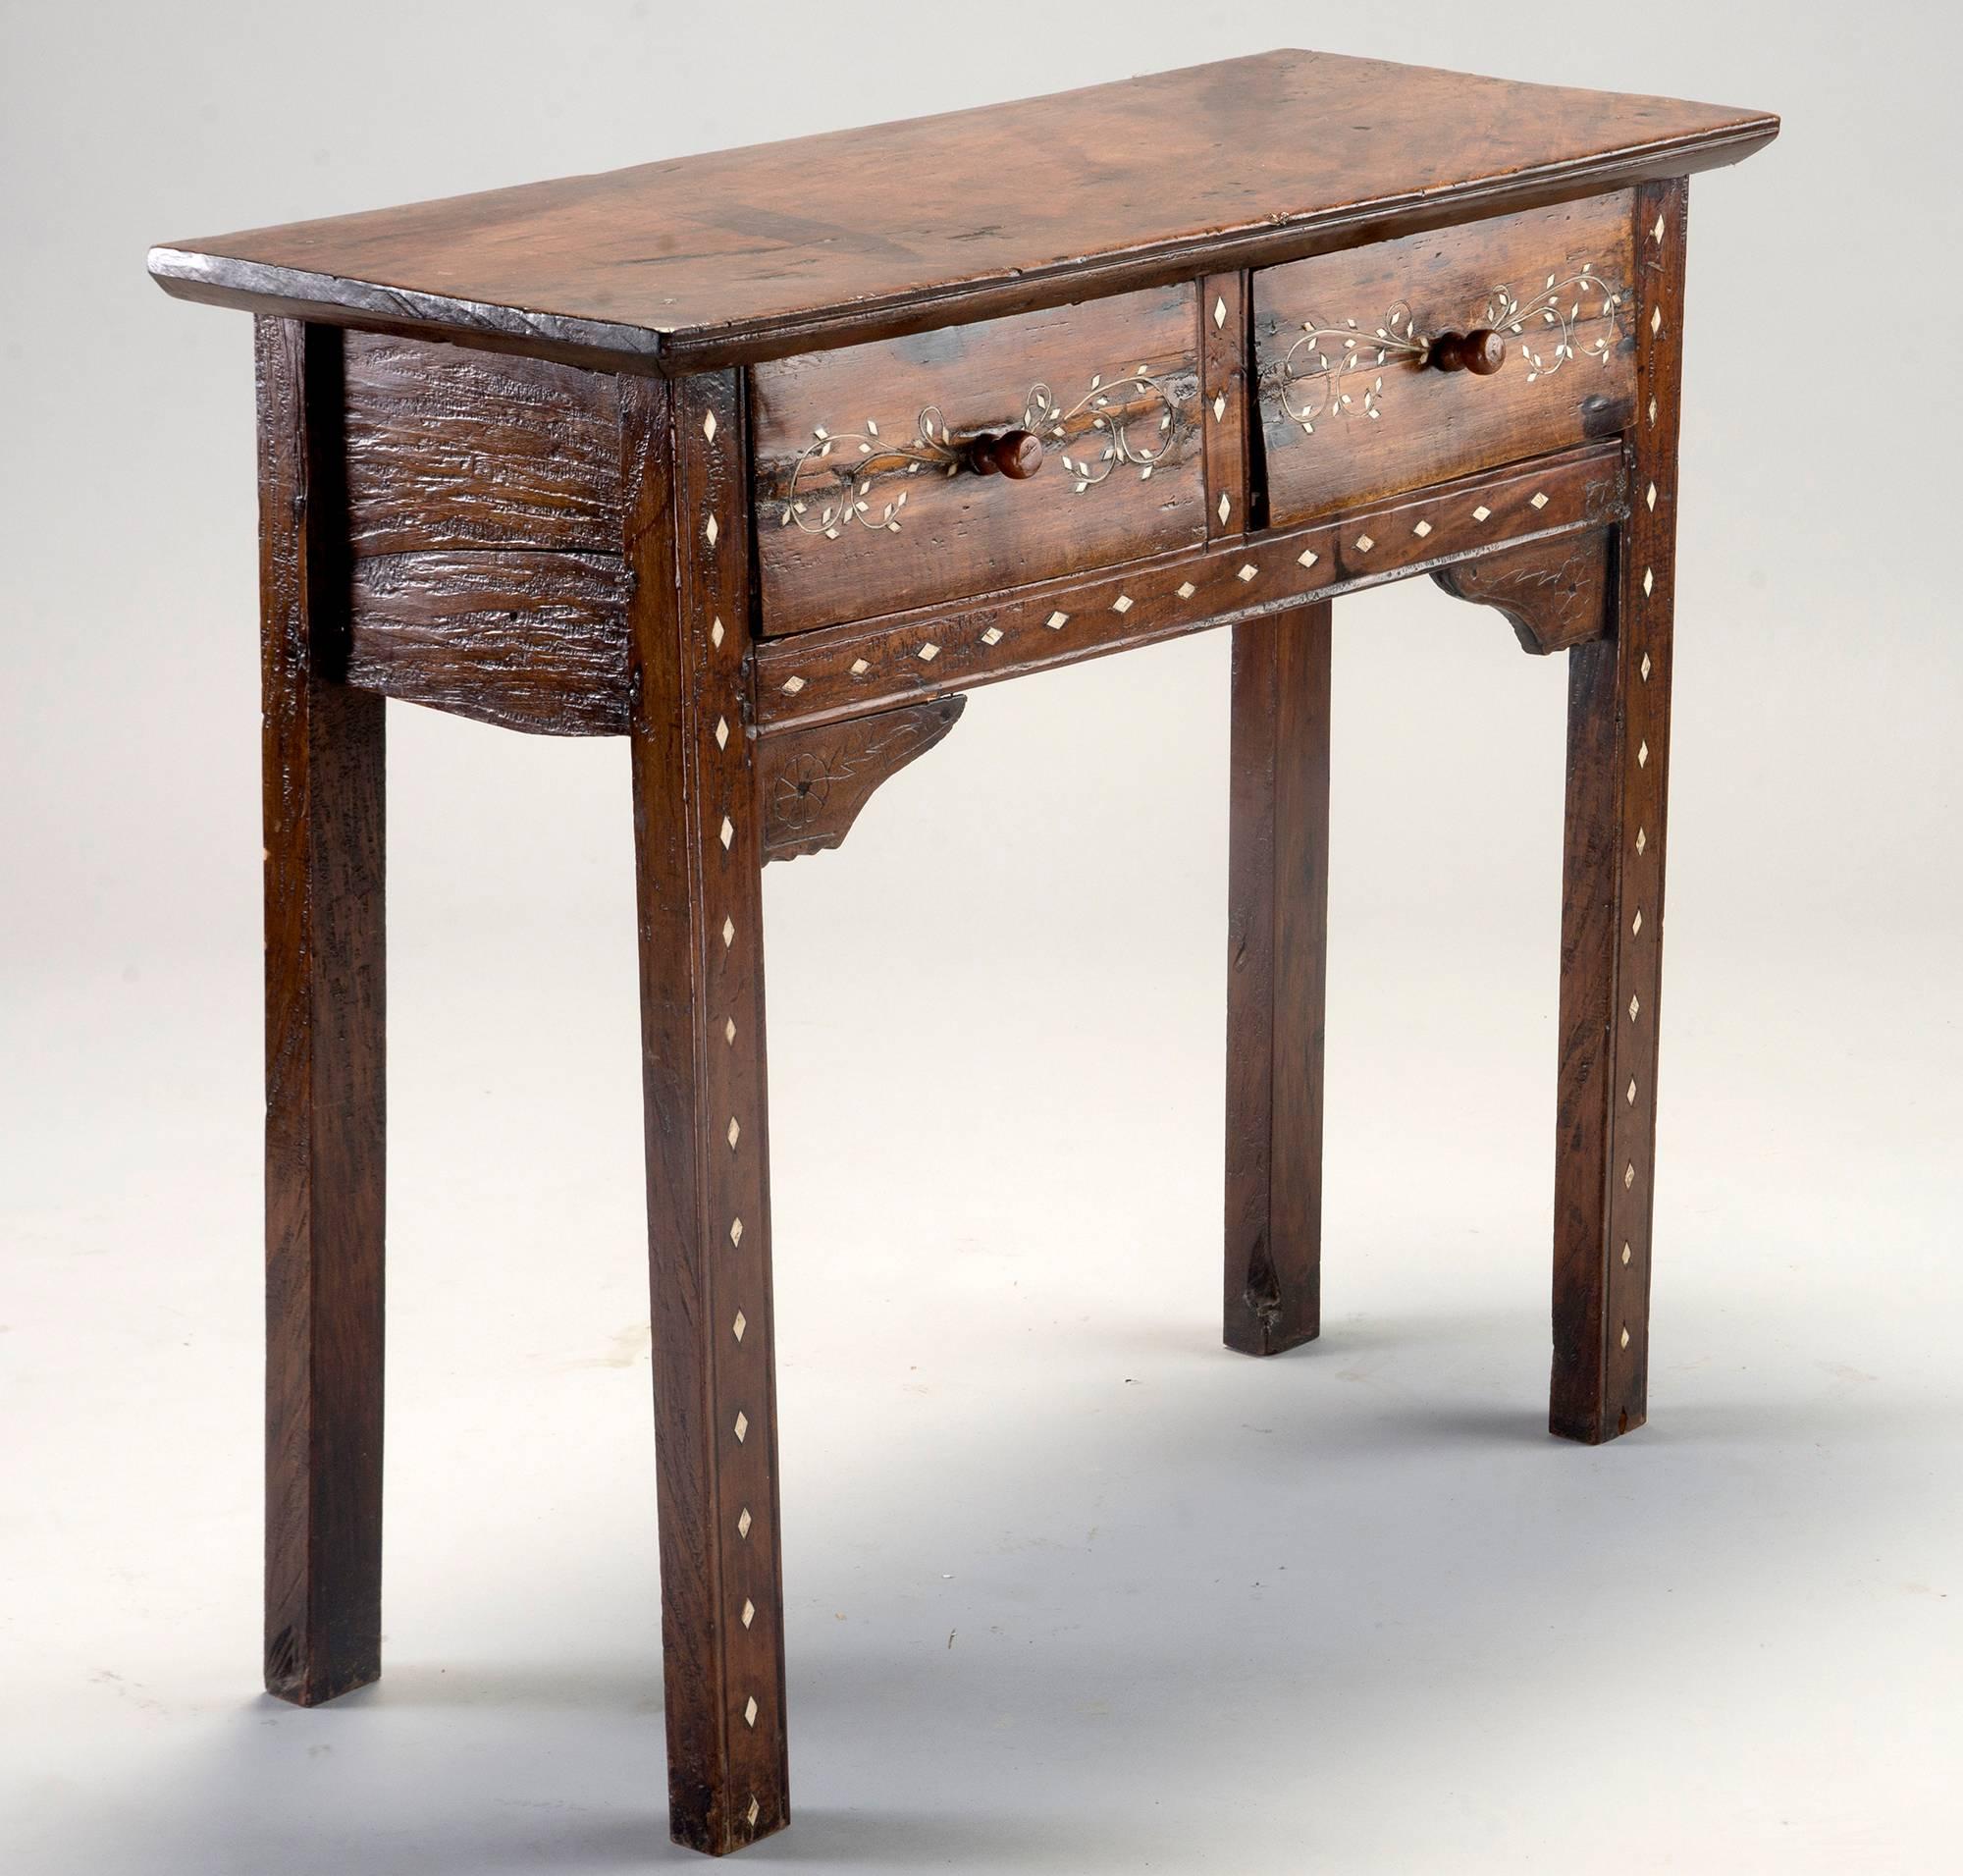 Small dark wood console has two drawers, and bone inlay in a diamond pattern on front legs and apron and a leaf and vine inlay pattern on drawer fronts, circa 1920s. Moorish style - but also could have been crafted in India or the Middle East.